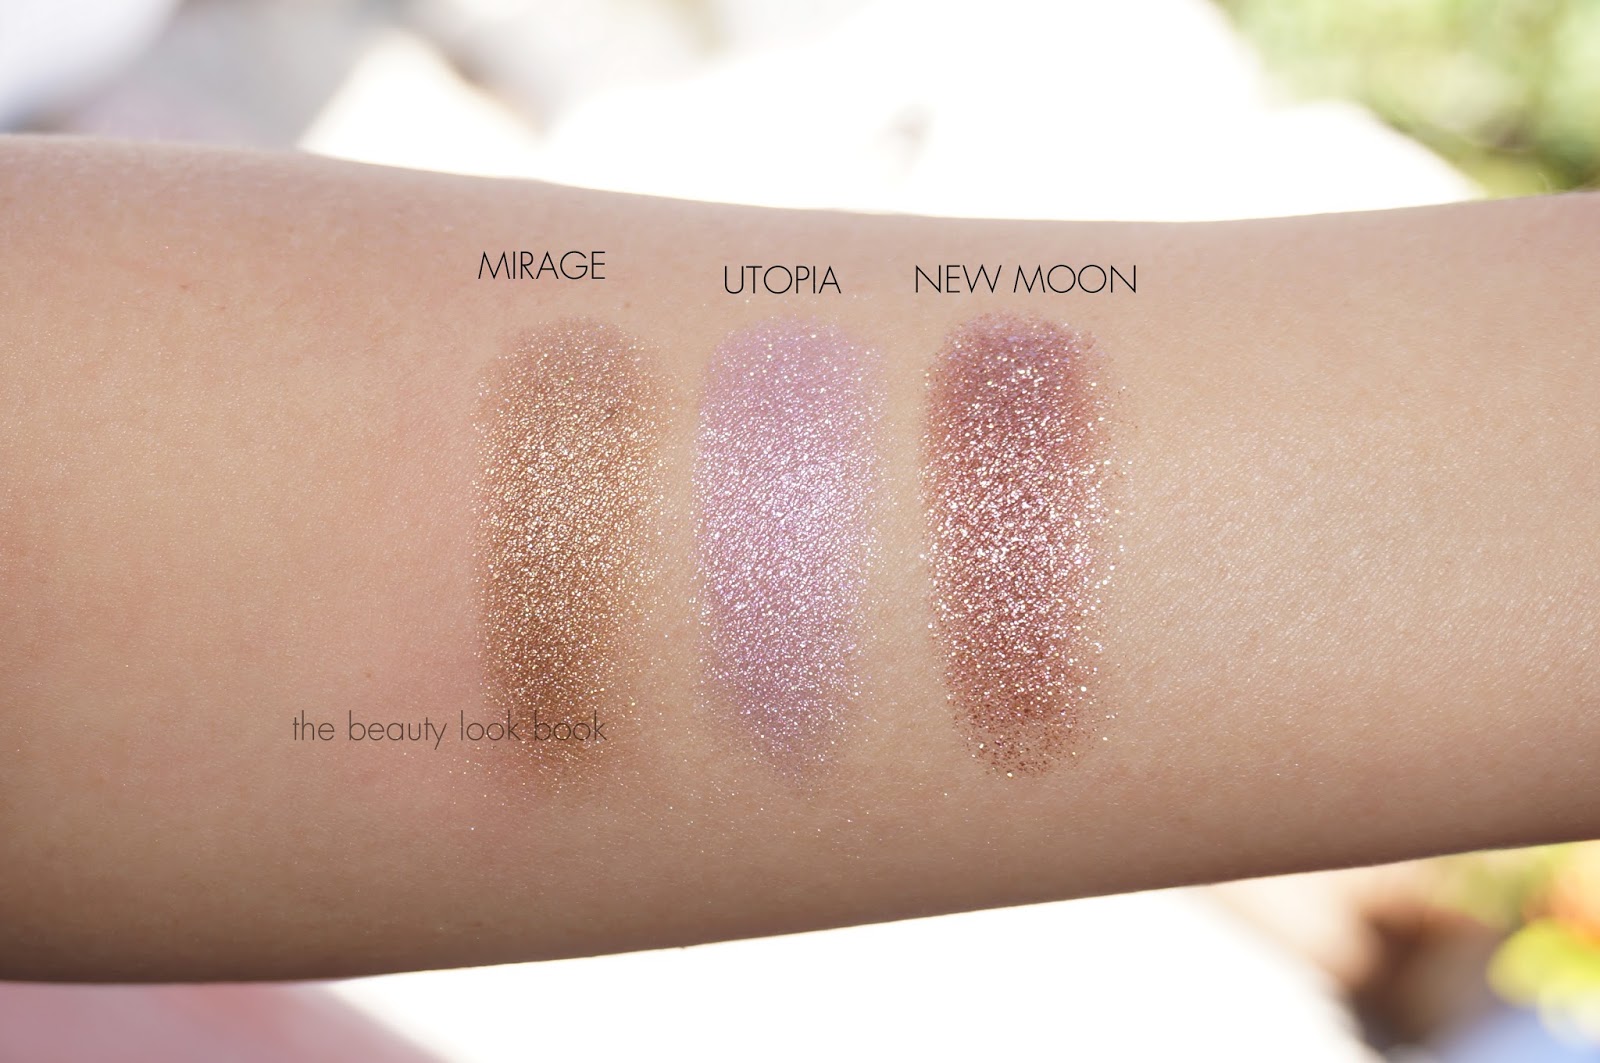 Chanel Illusion D'Ombre – Mirage, Utopia & New Moon Review